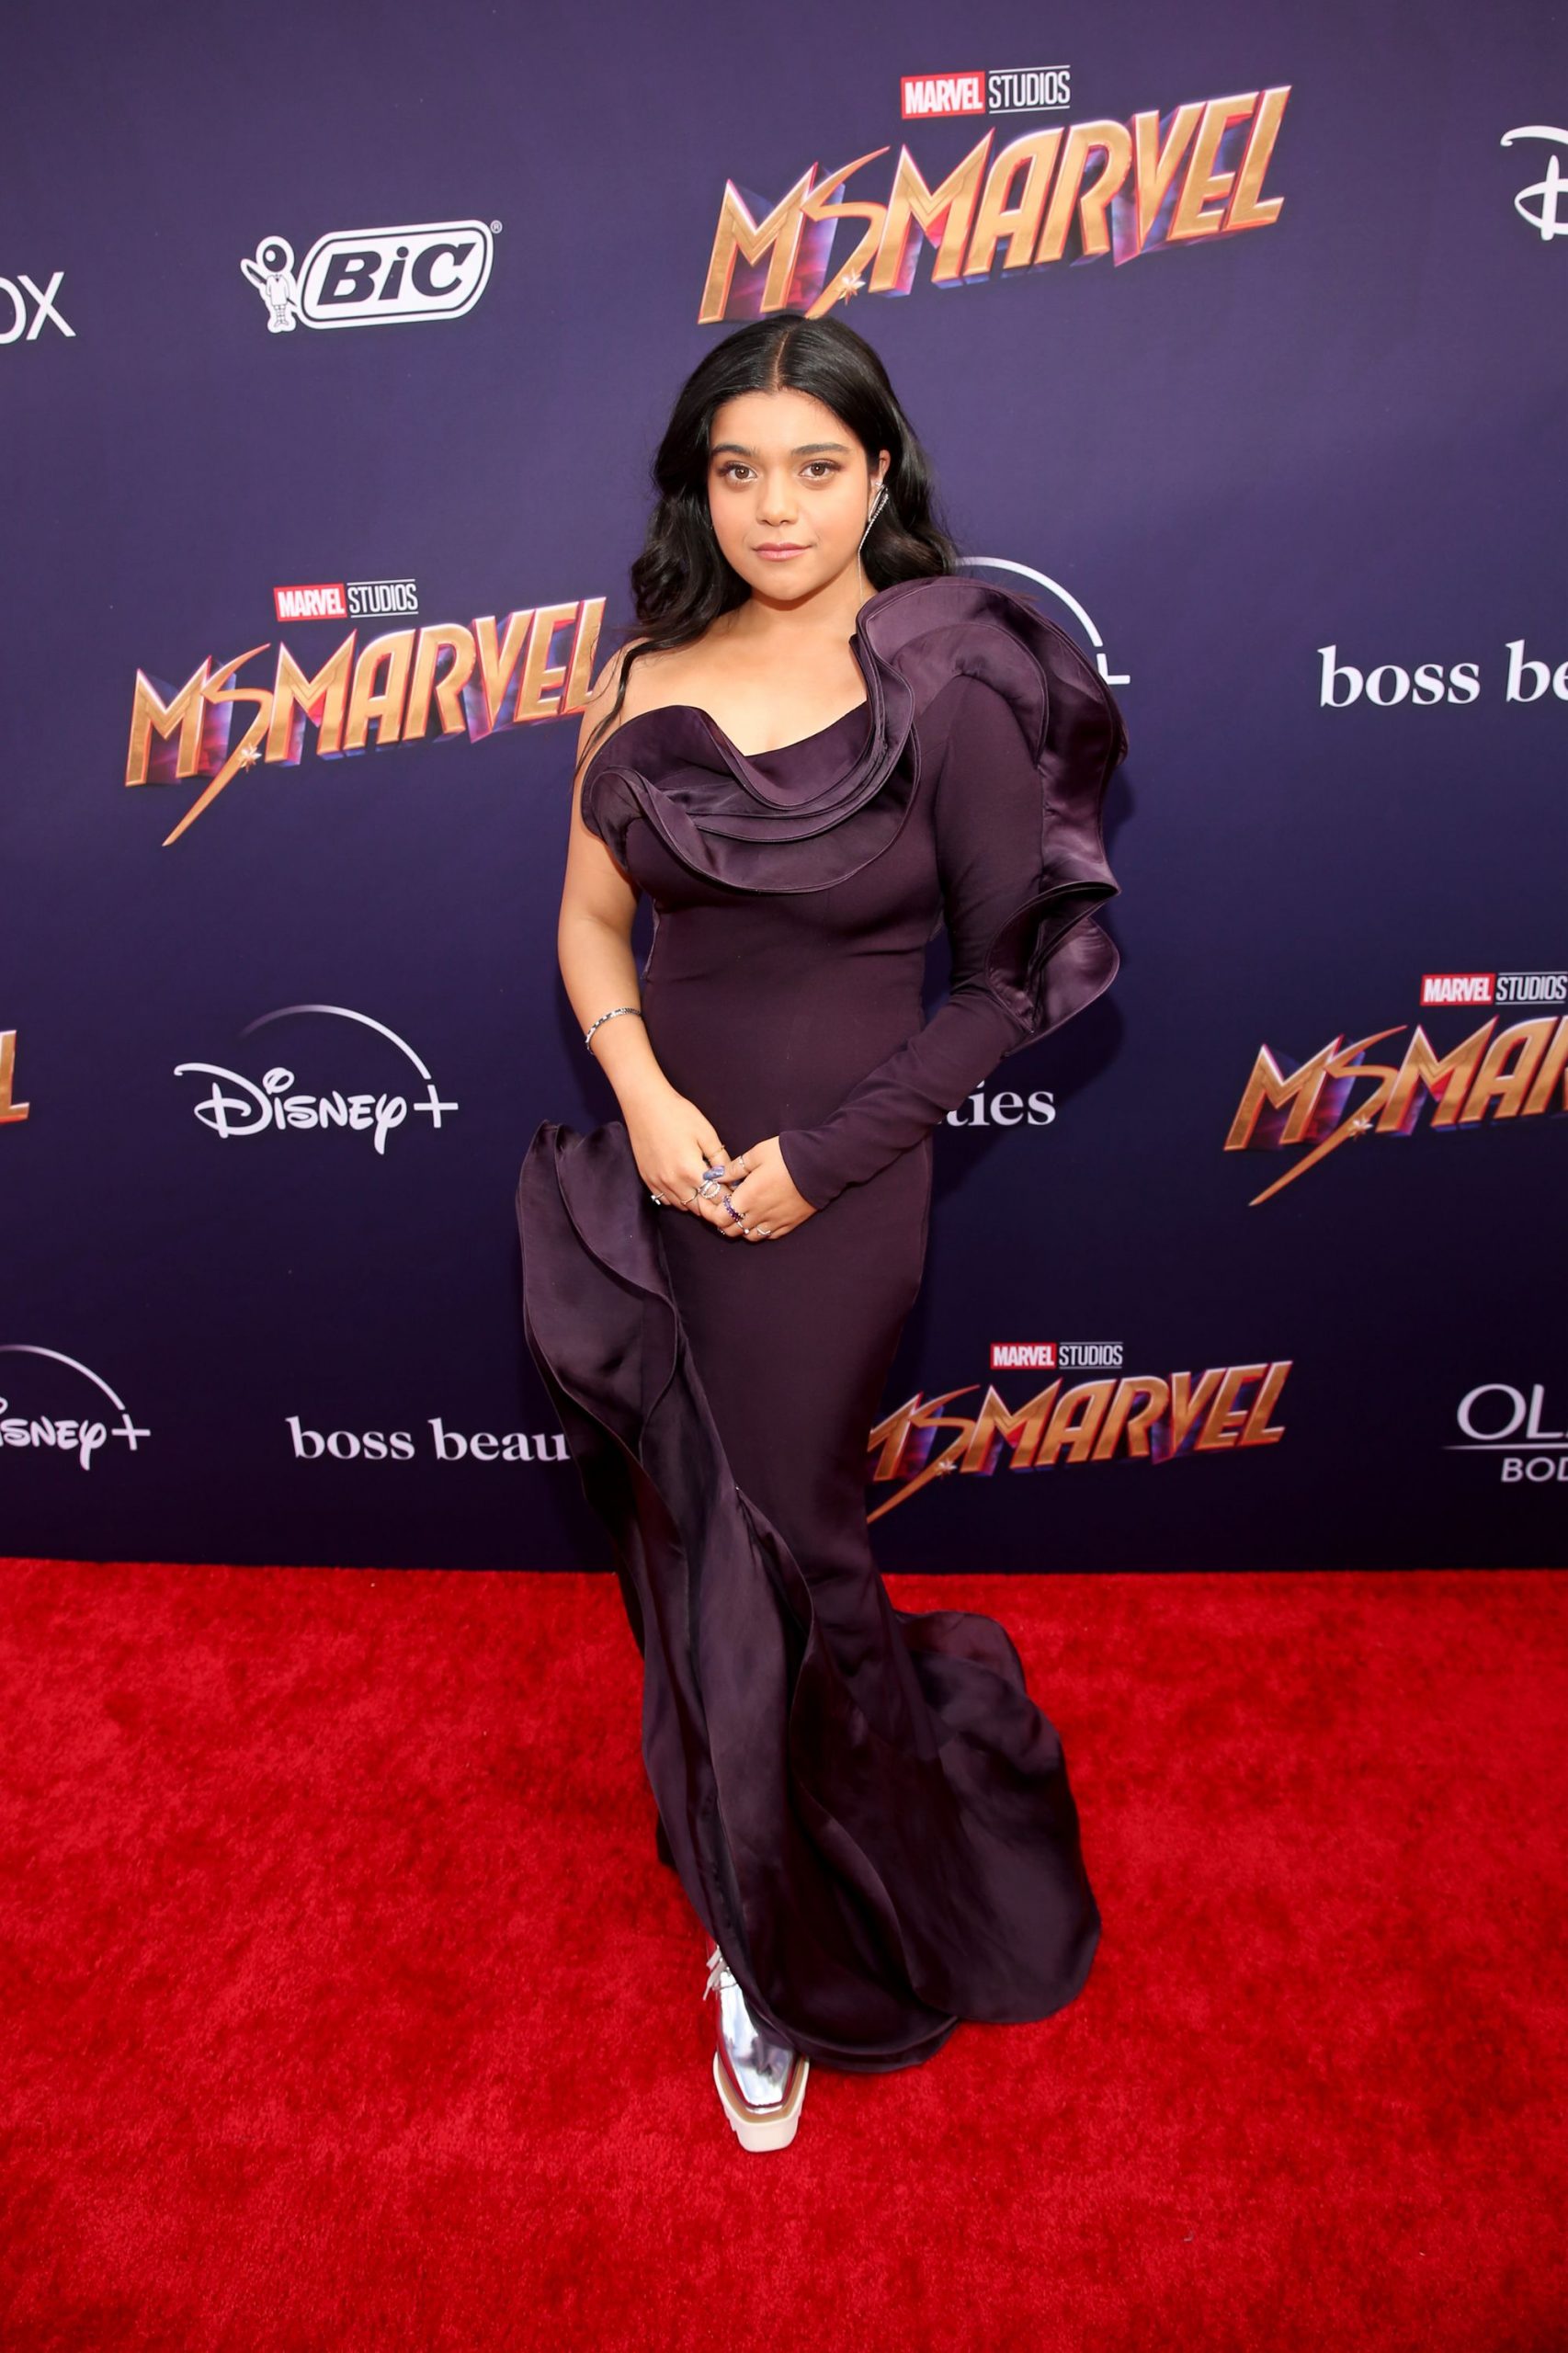 101 Photos Of Marvel Actors From Over 10 Years Of Red Carpets And